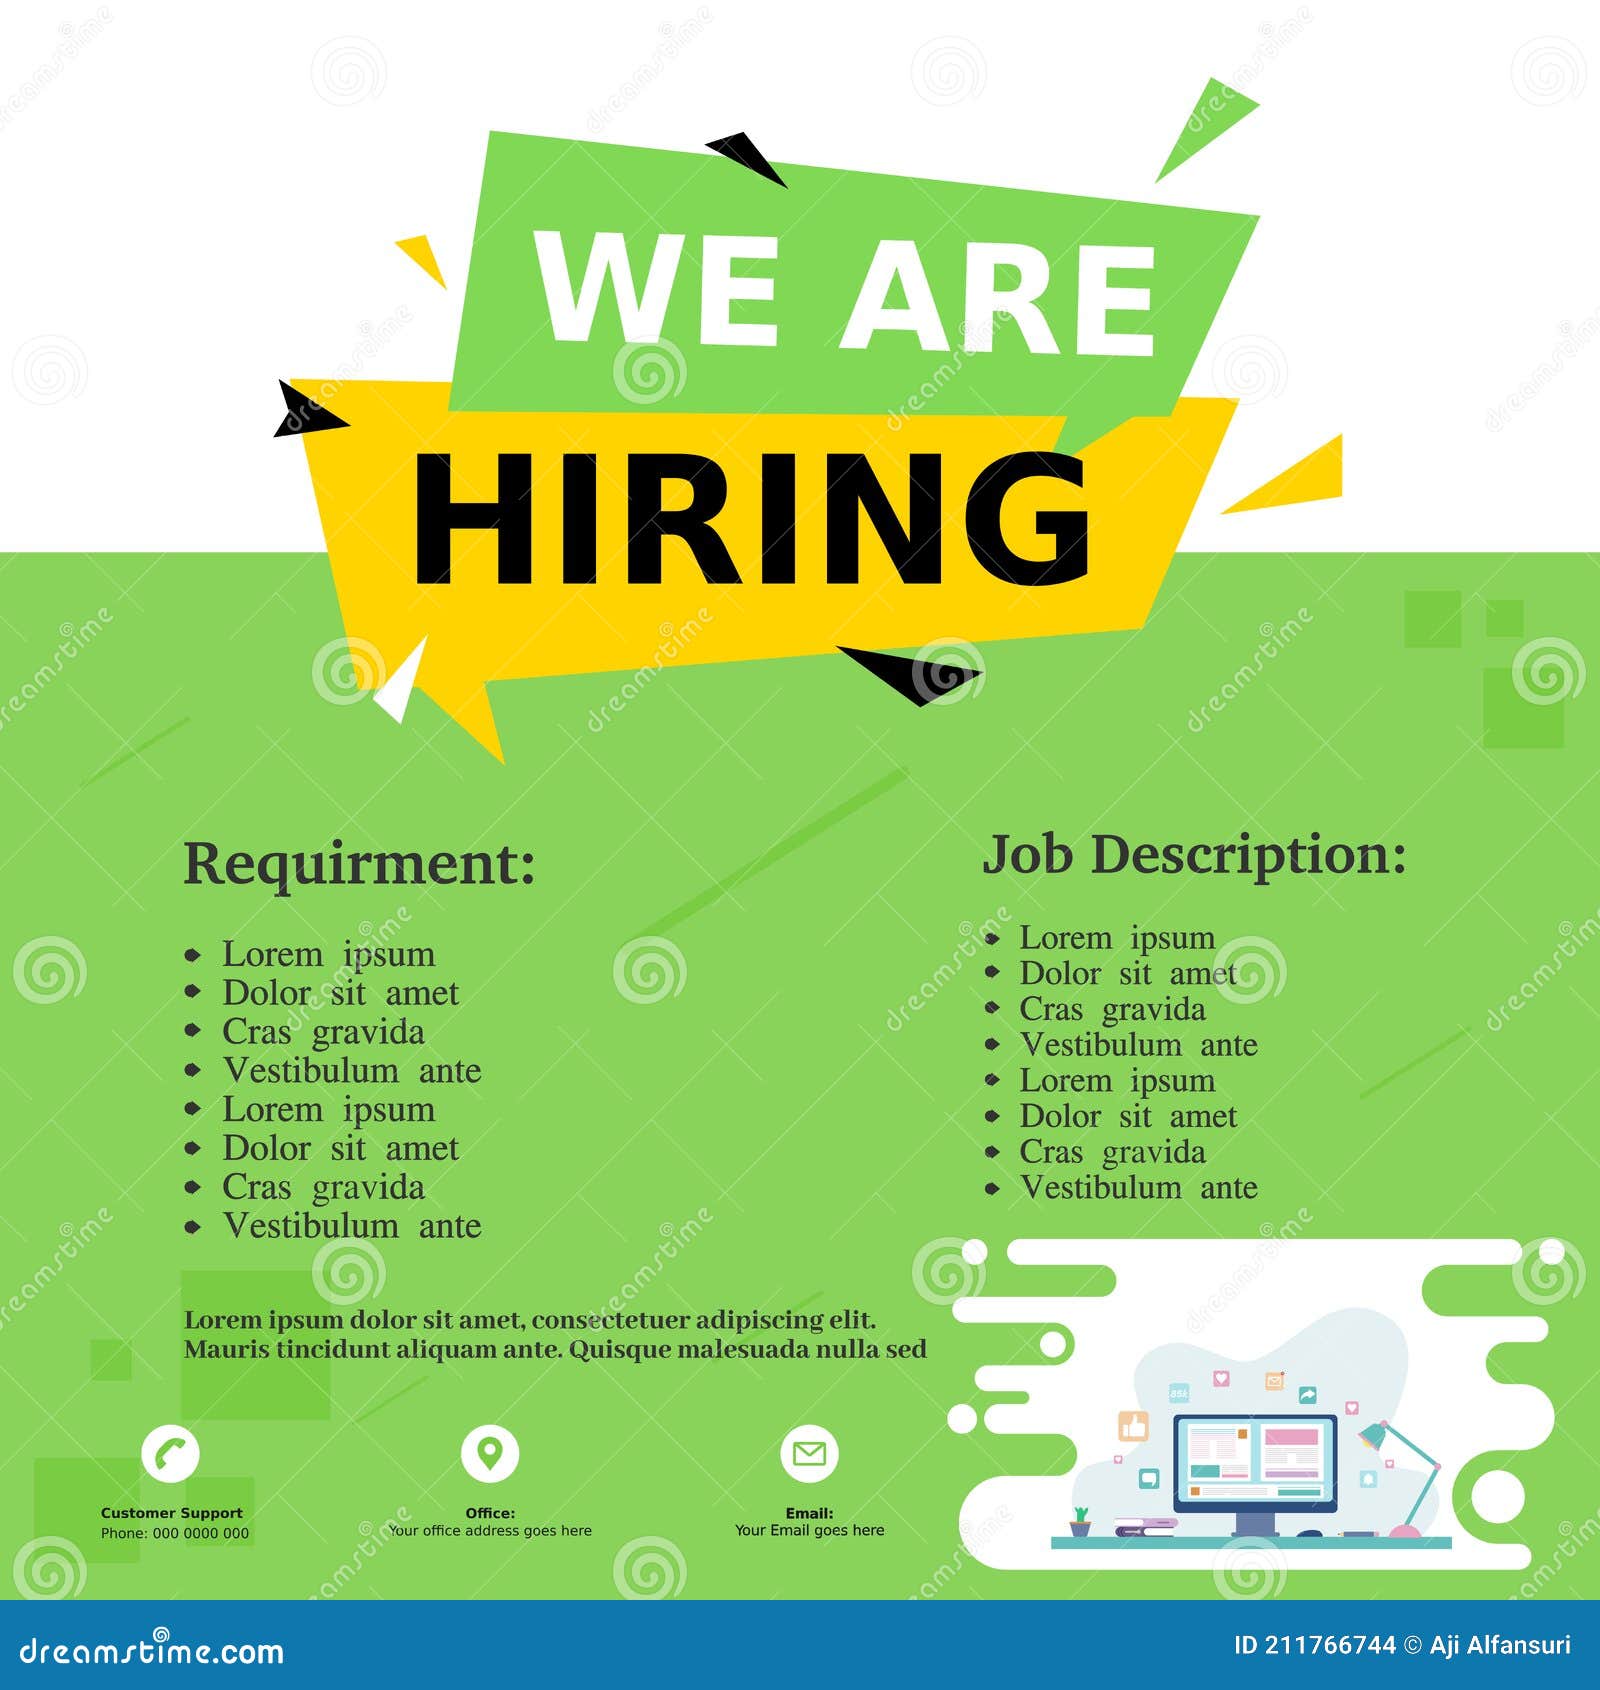 We are hiring poster for people recruitment Vector Image